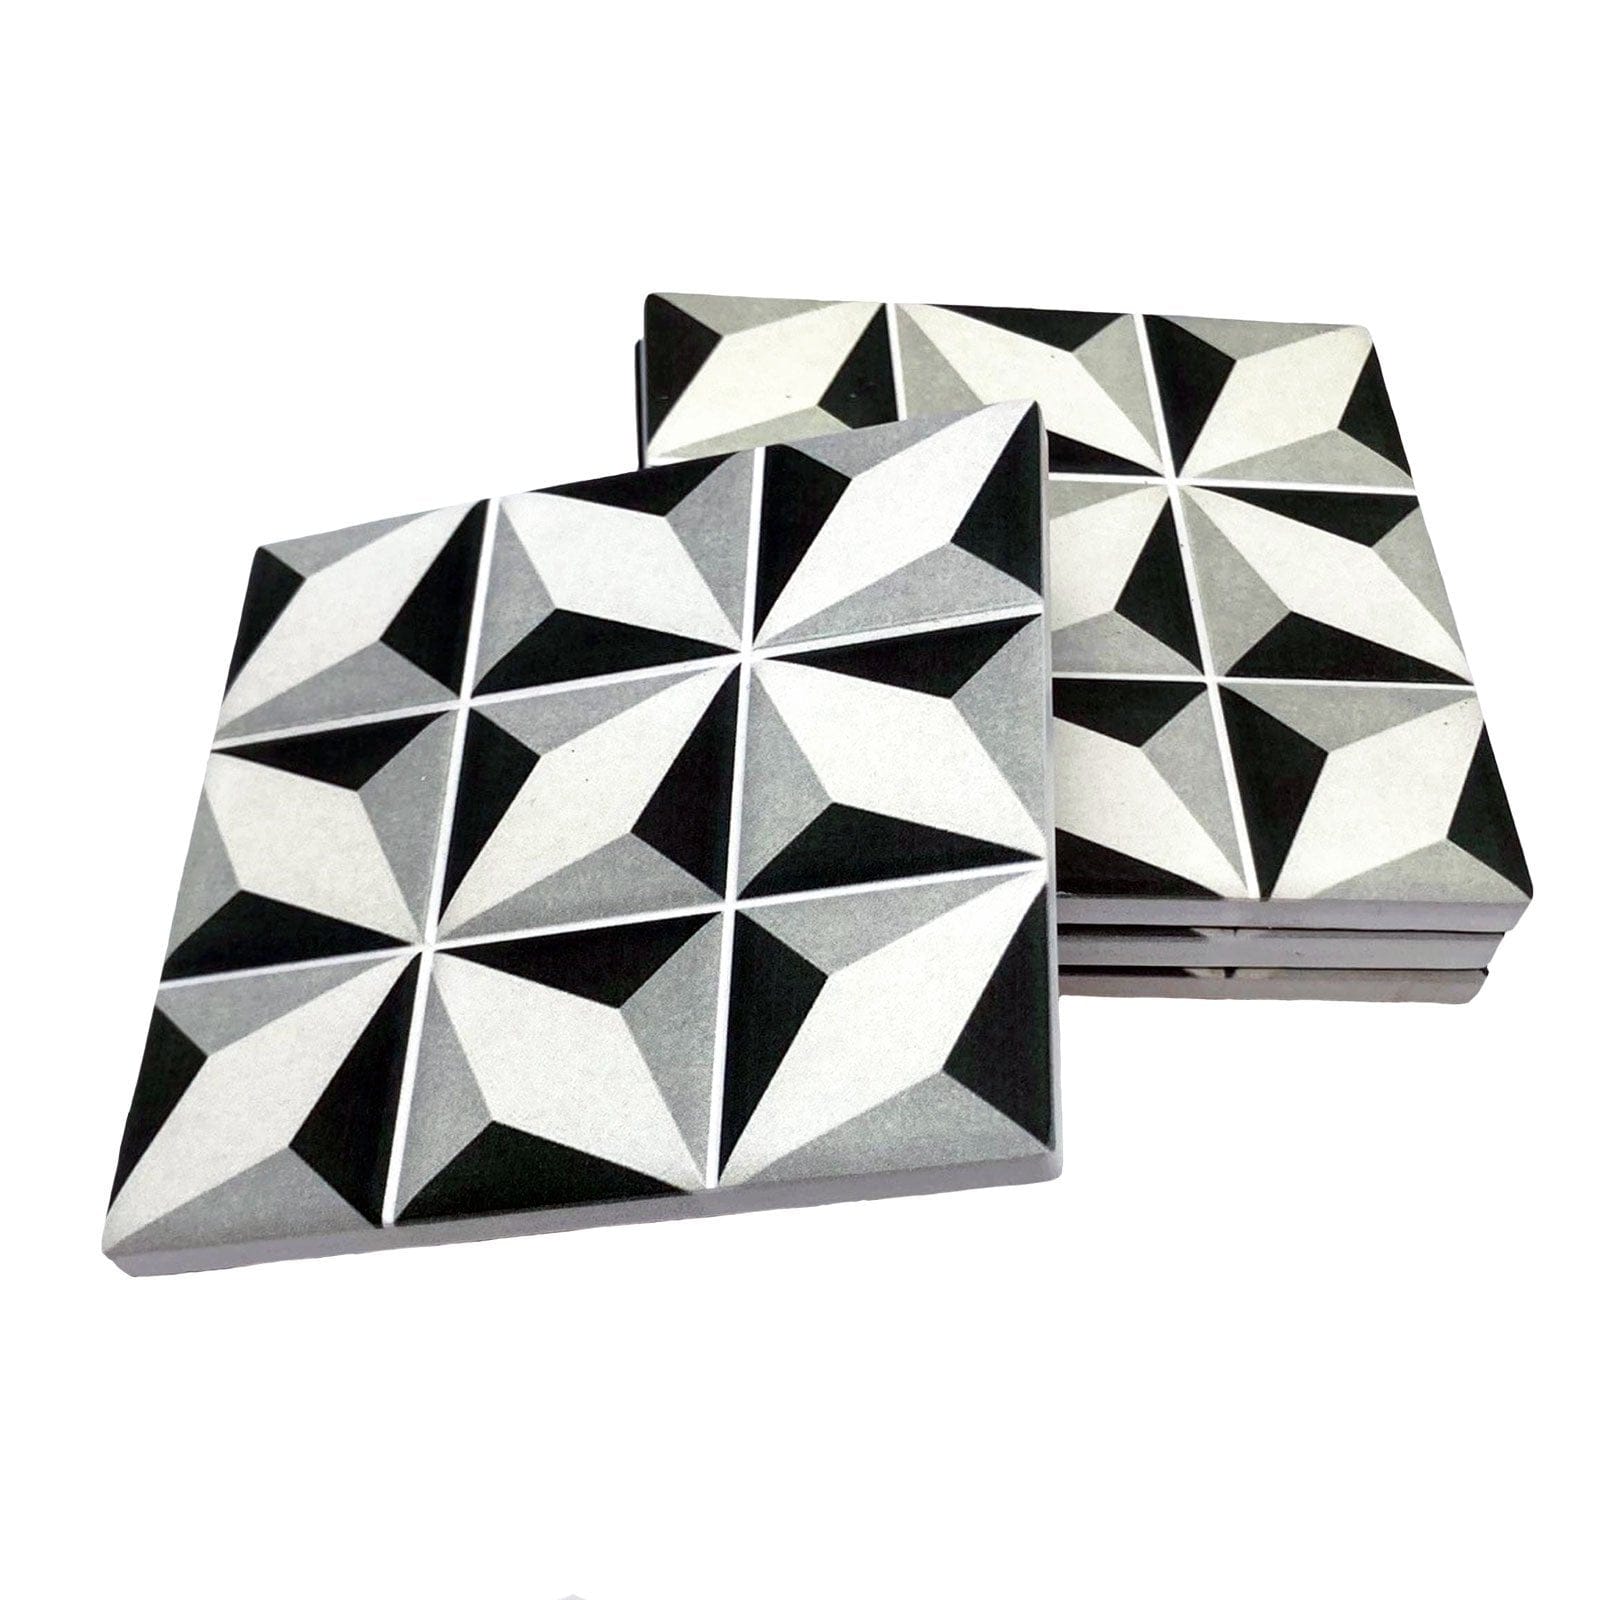 Grey and White Moroccan Tile Coasters - Set of 4